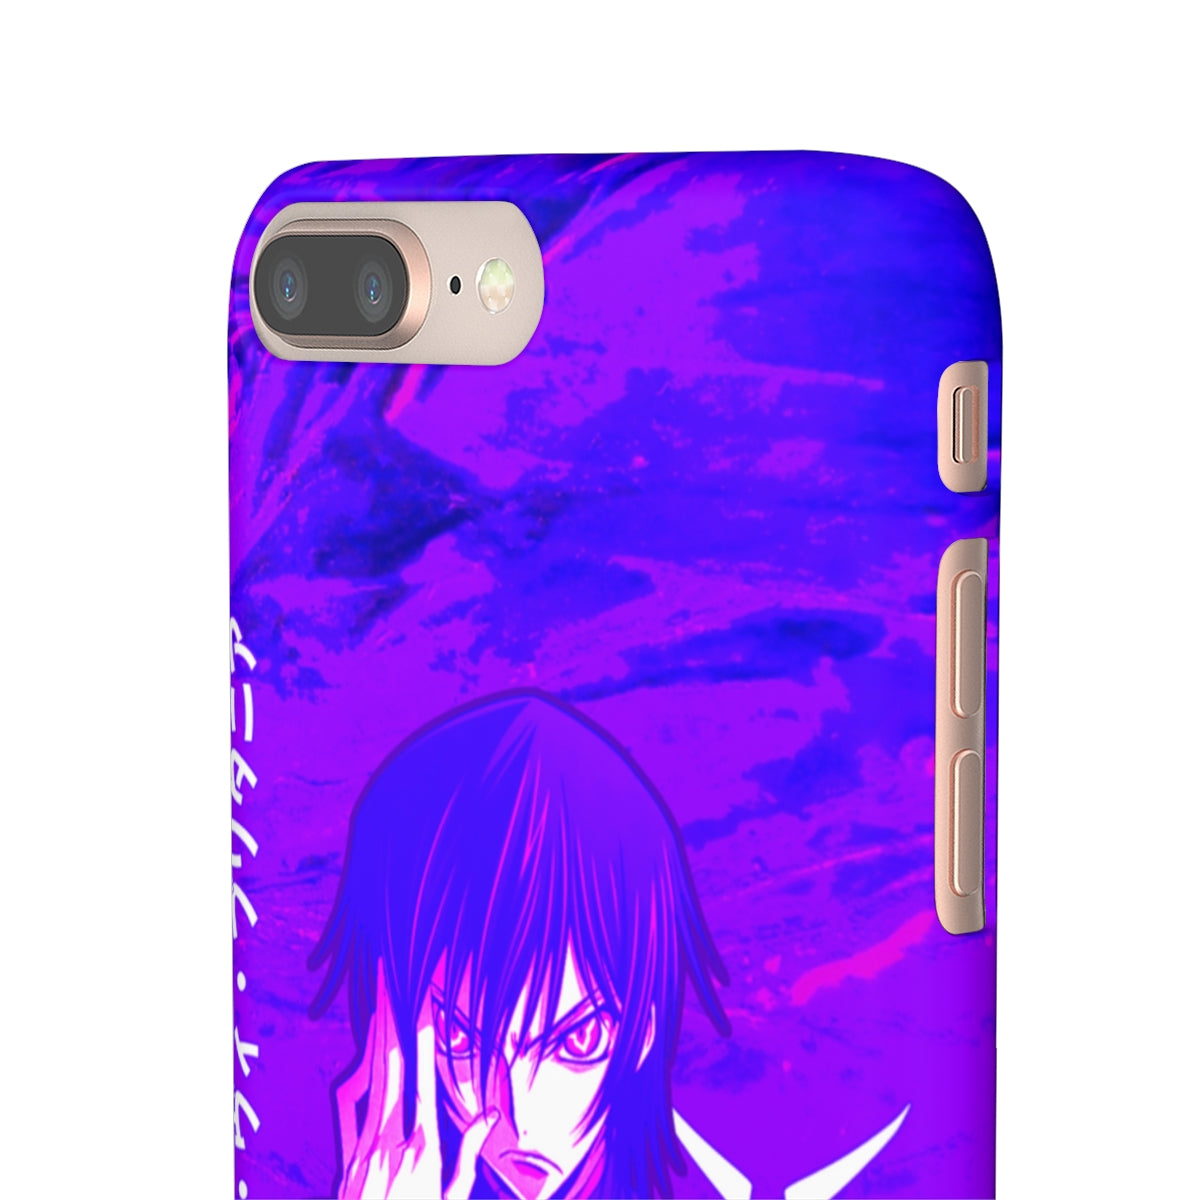 Lelouch iPhone Snap Case